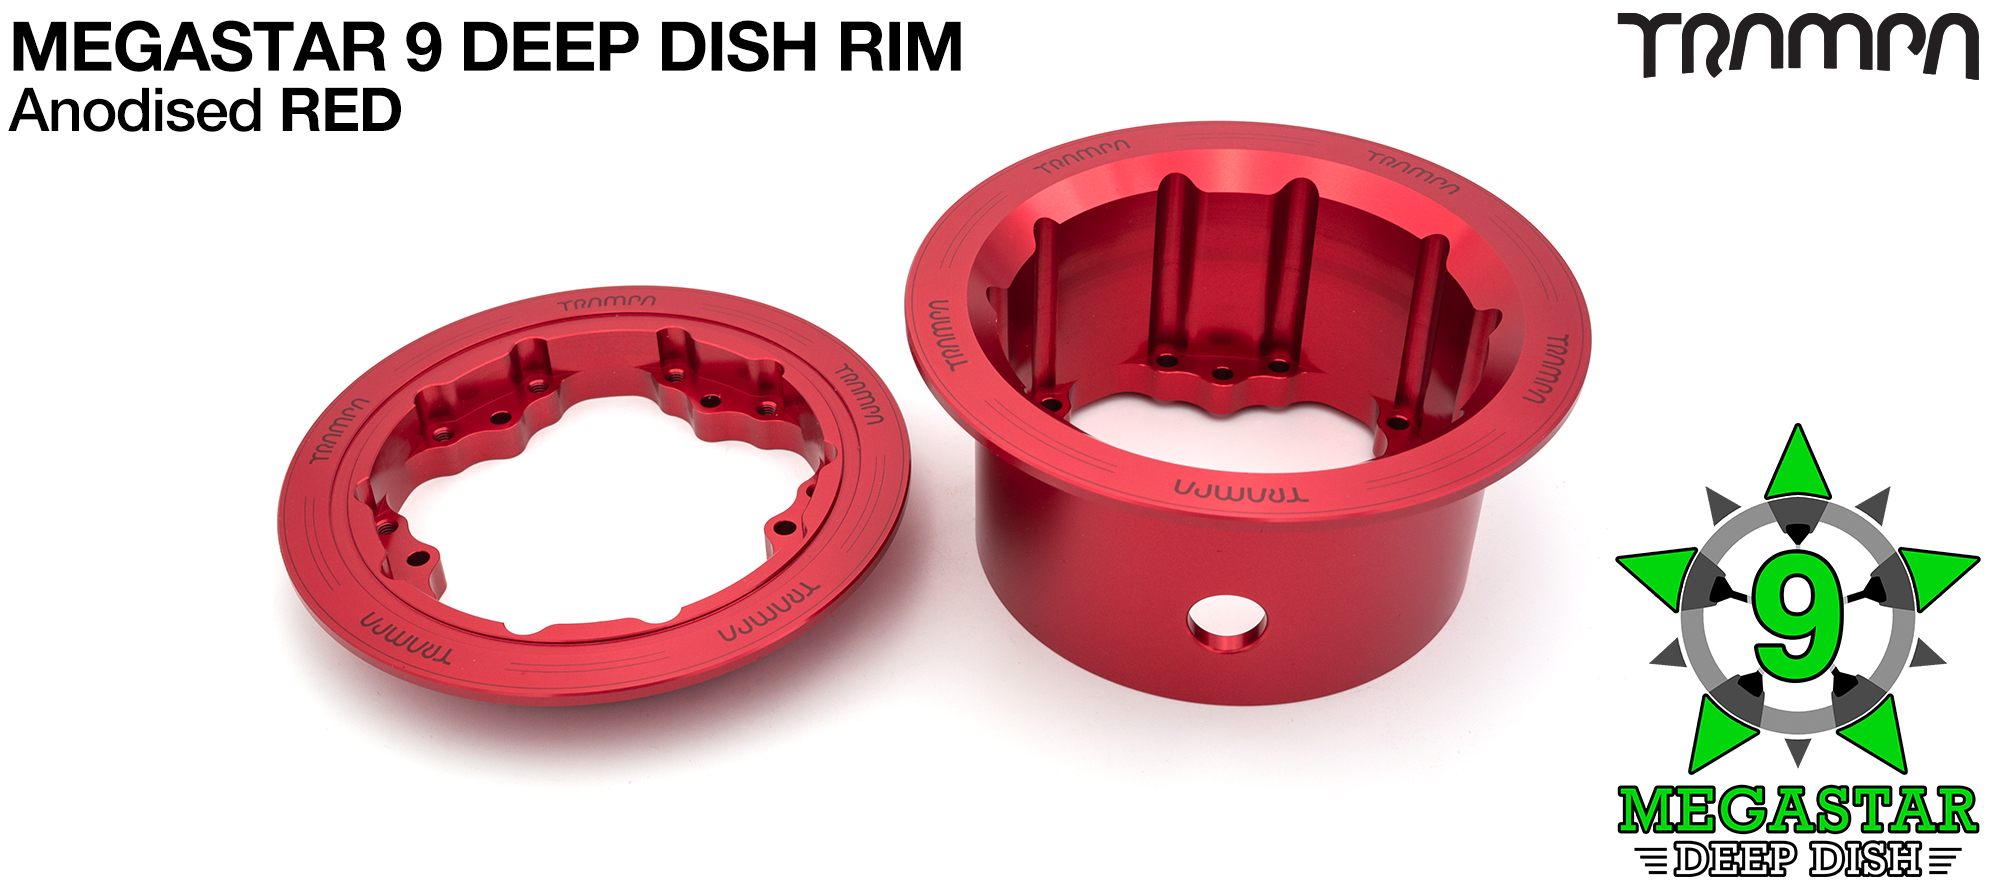 MEGASTAR 9 DEEP-DISH Rims Measure 3.75/4x 3 Inch. The Bearings are positioned OFF-SET & accept 4 Inch Rim Tyres to make 9 or 10 inch Wheels - RED